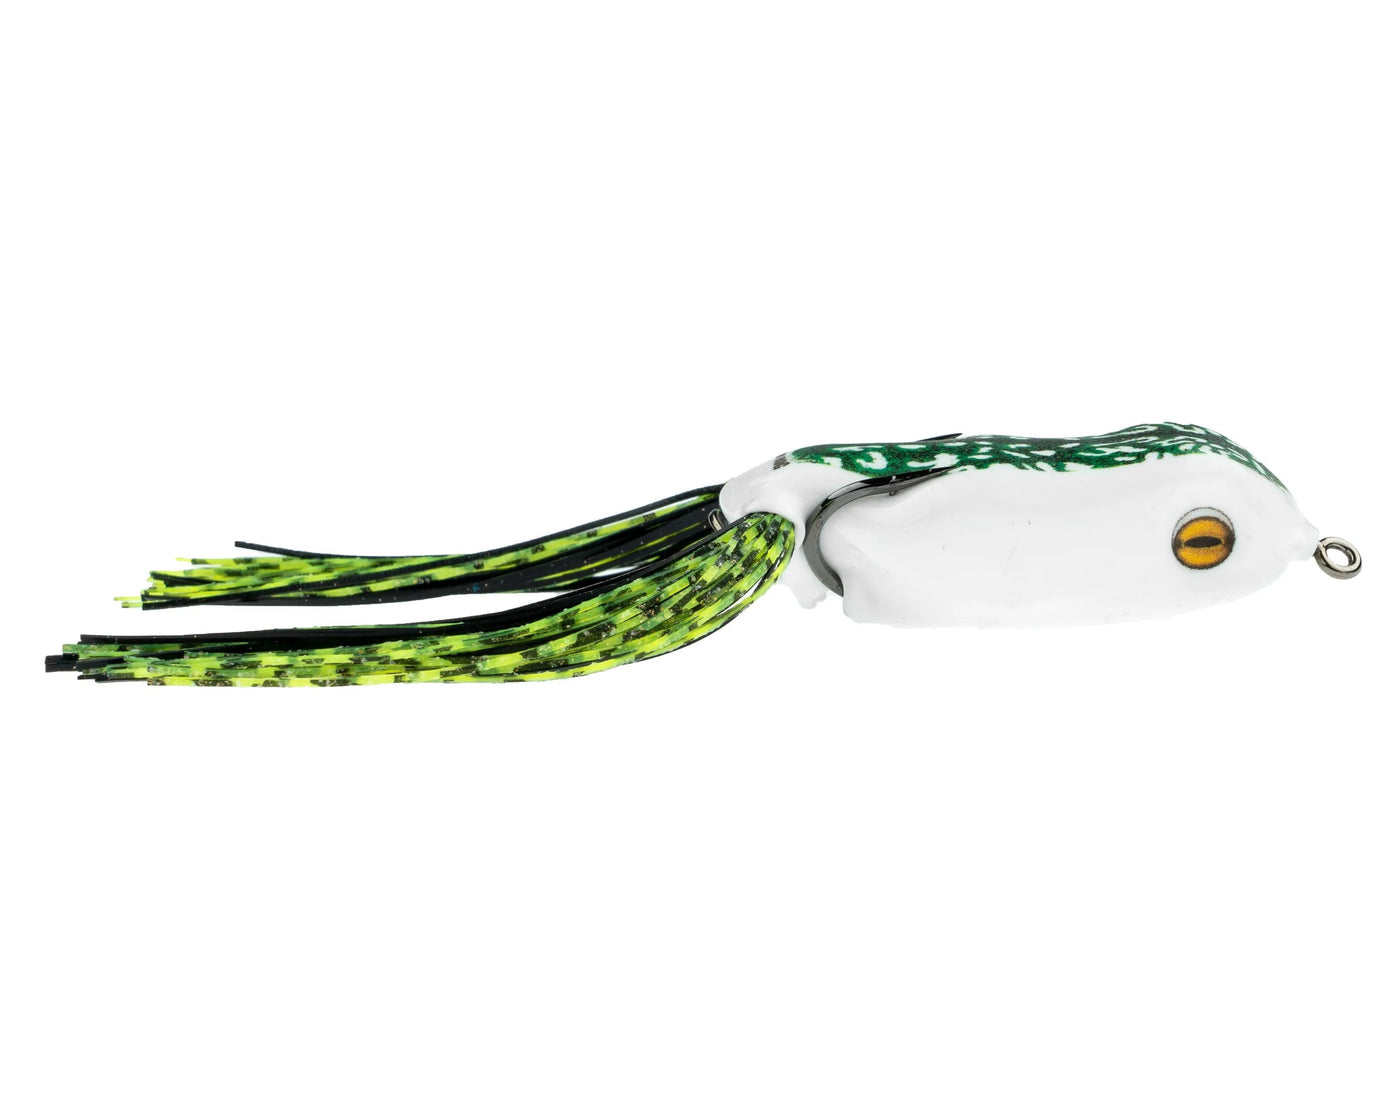 Scum Frog - Pro Series Hollow Body Frog Lure Scum Frog Chartreuse/Black 